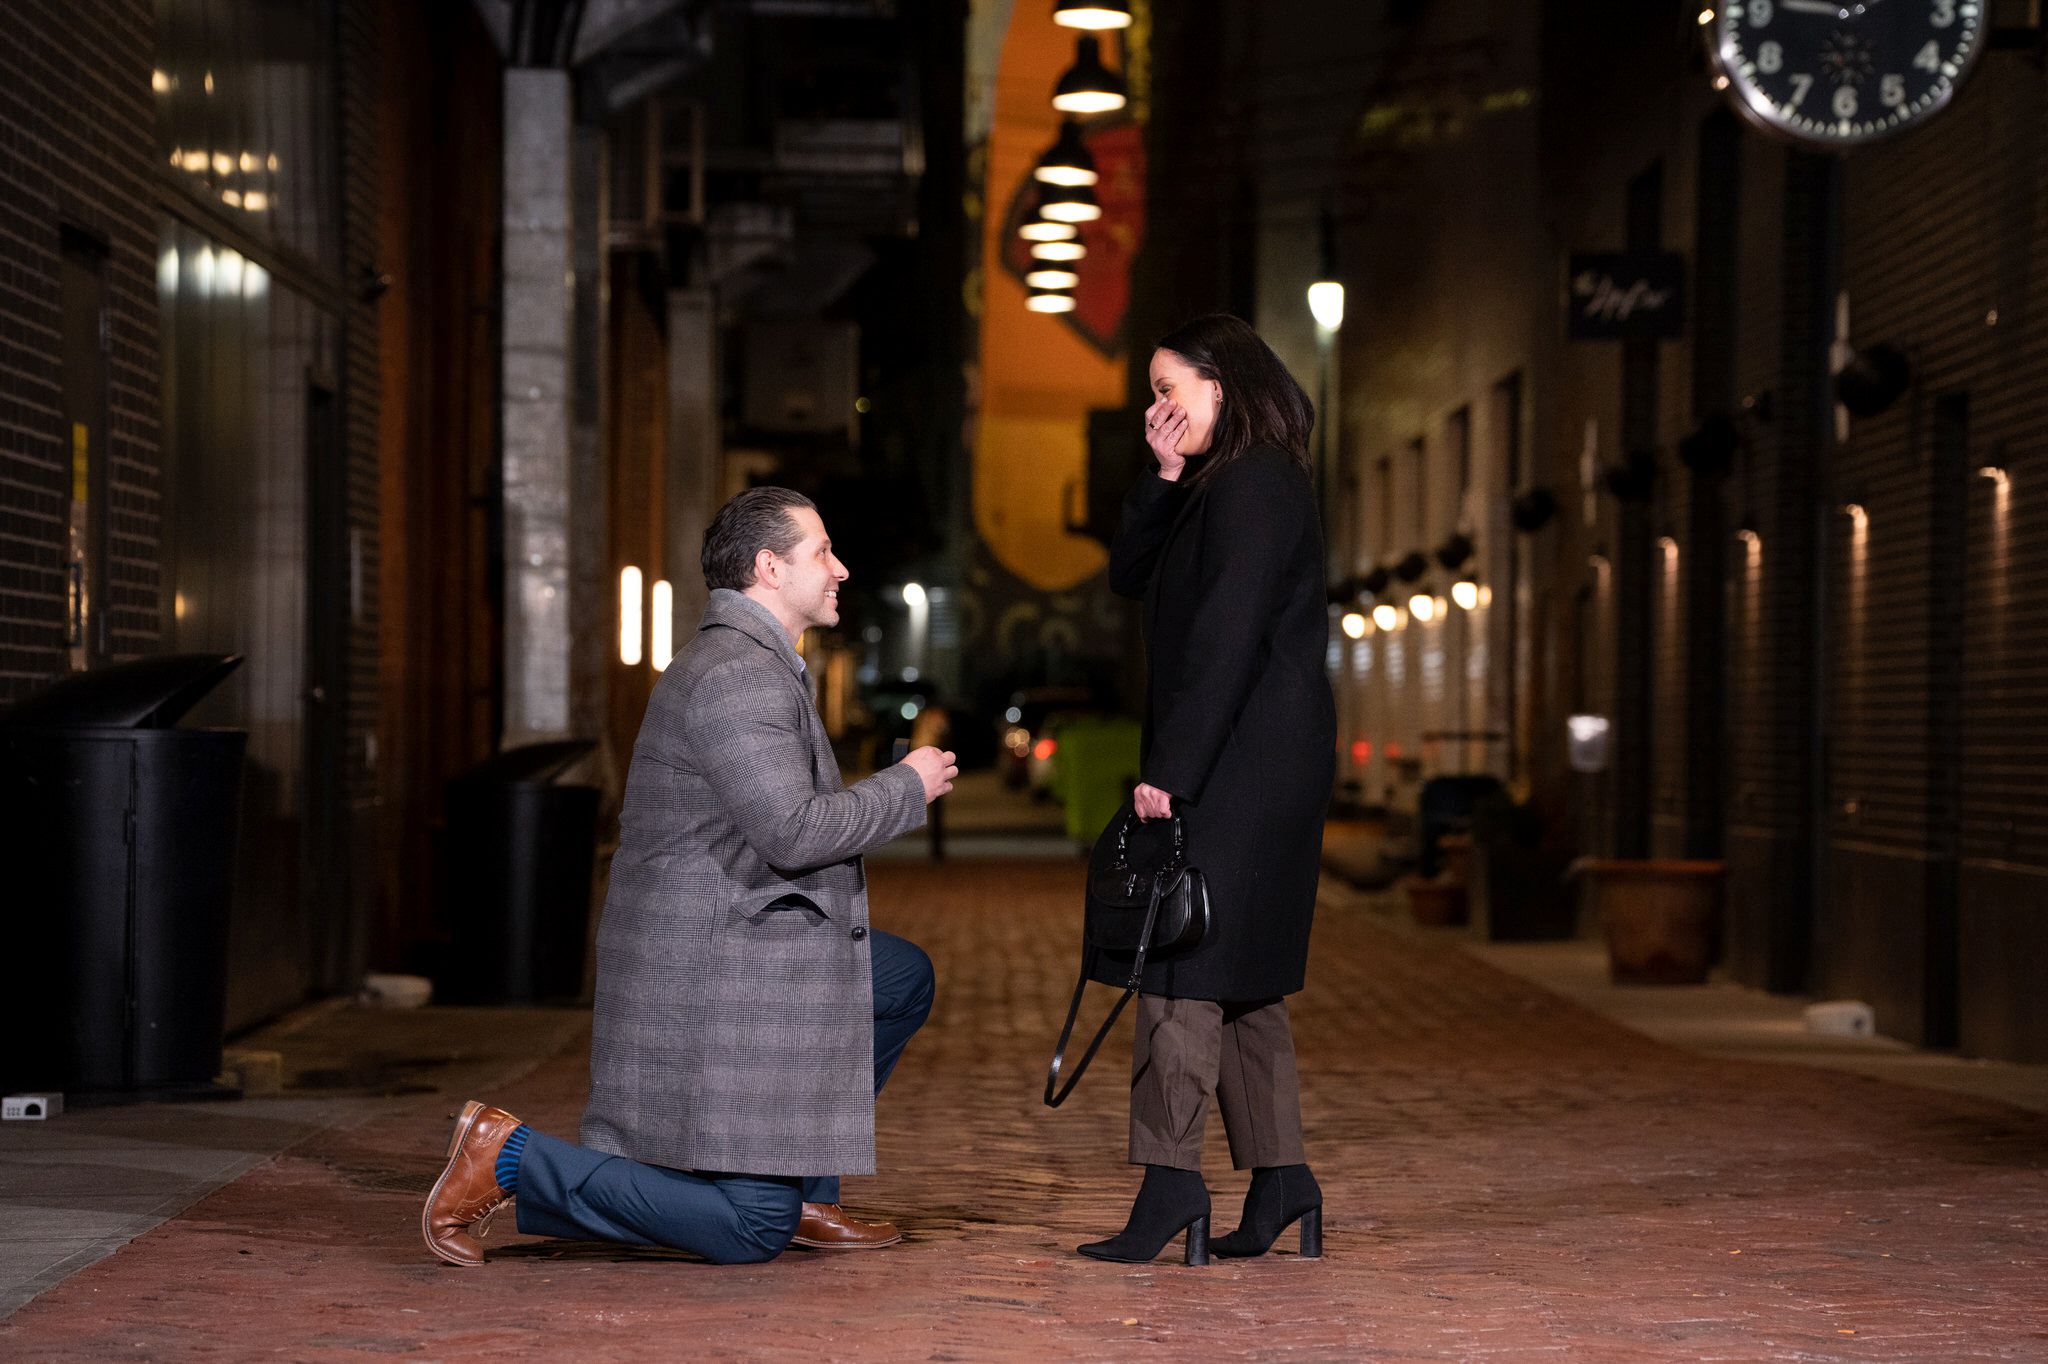 A woman reacts and covers her mouth during a proposal in Parker's Alley in Detroit.  